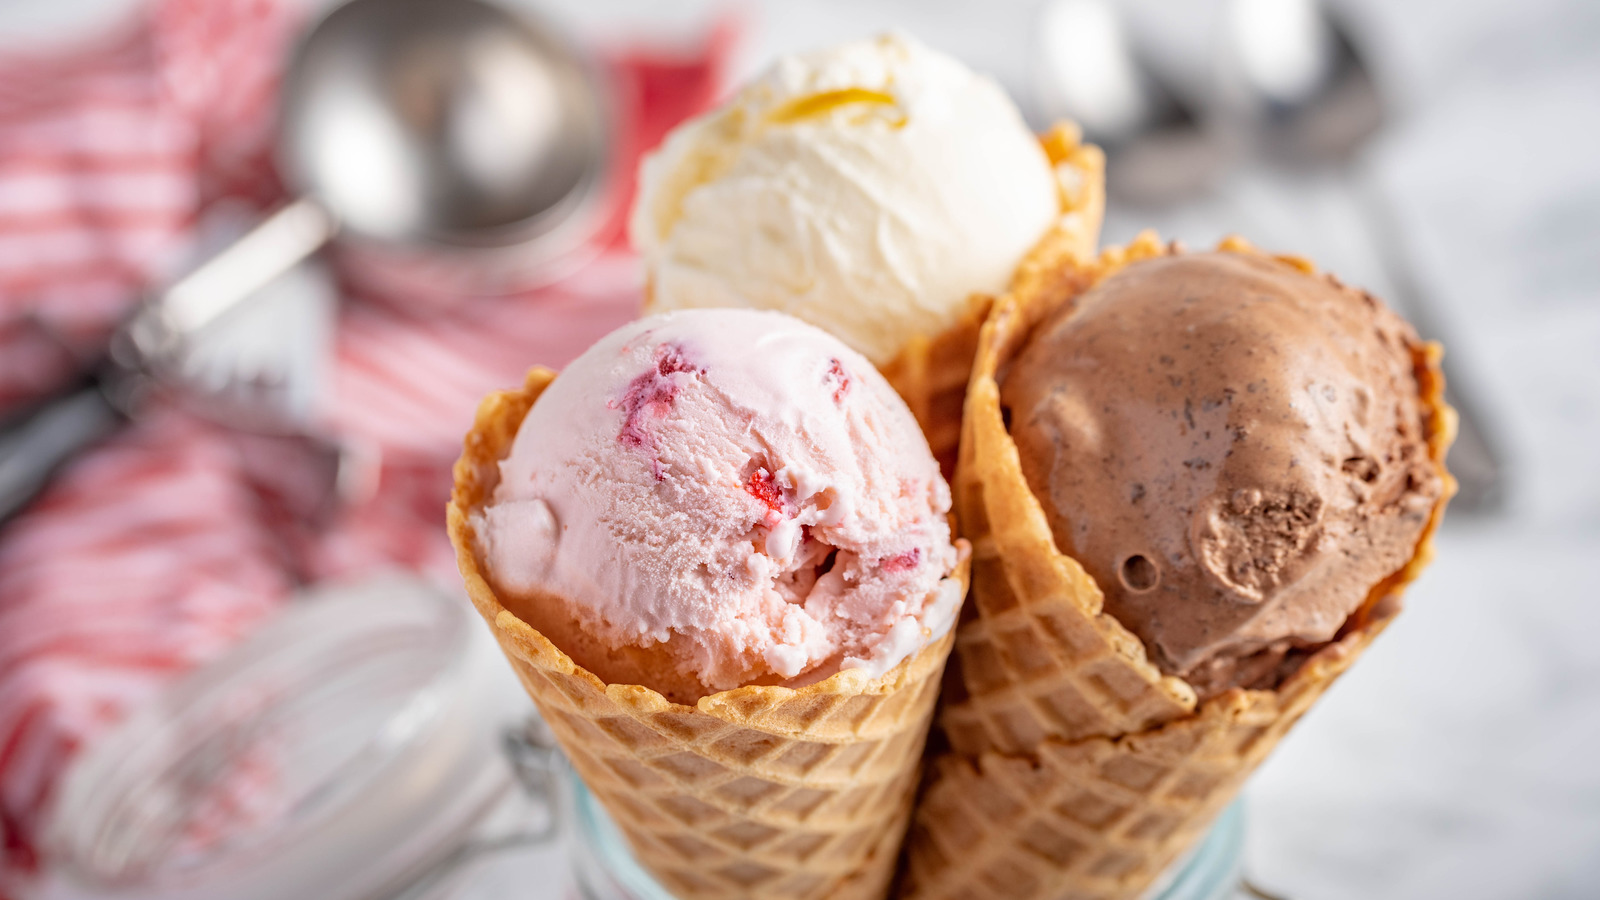 The Real Difference Between Soft Ice Cream And Regular Cream